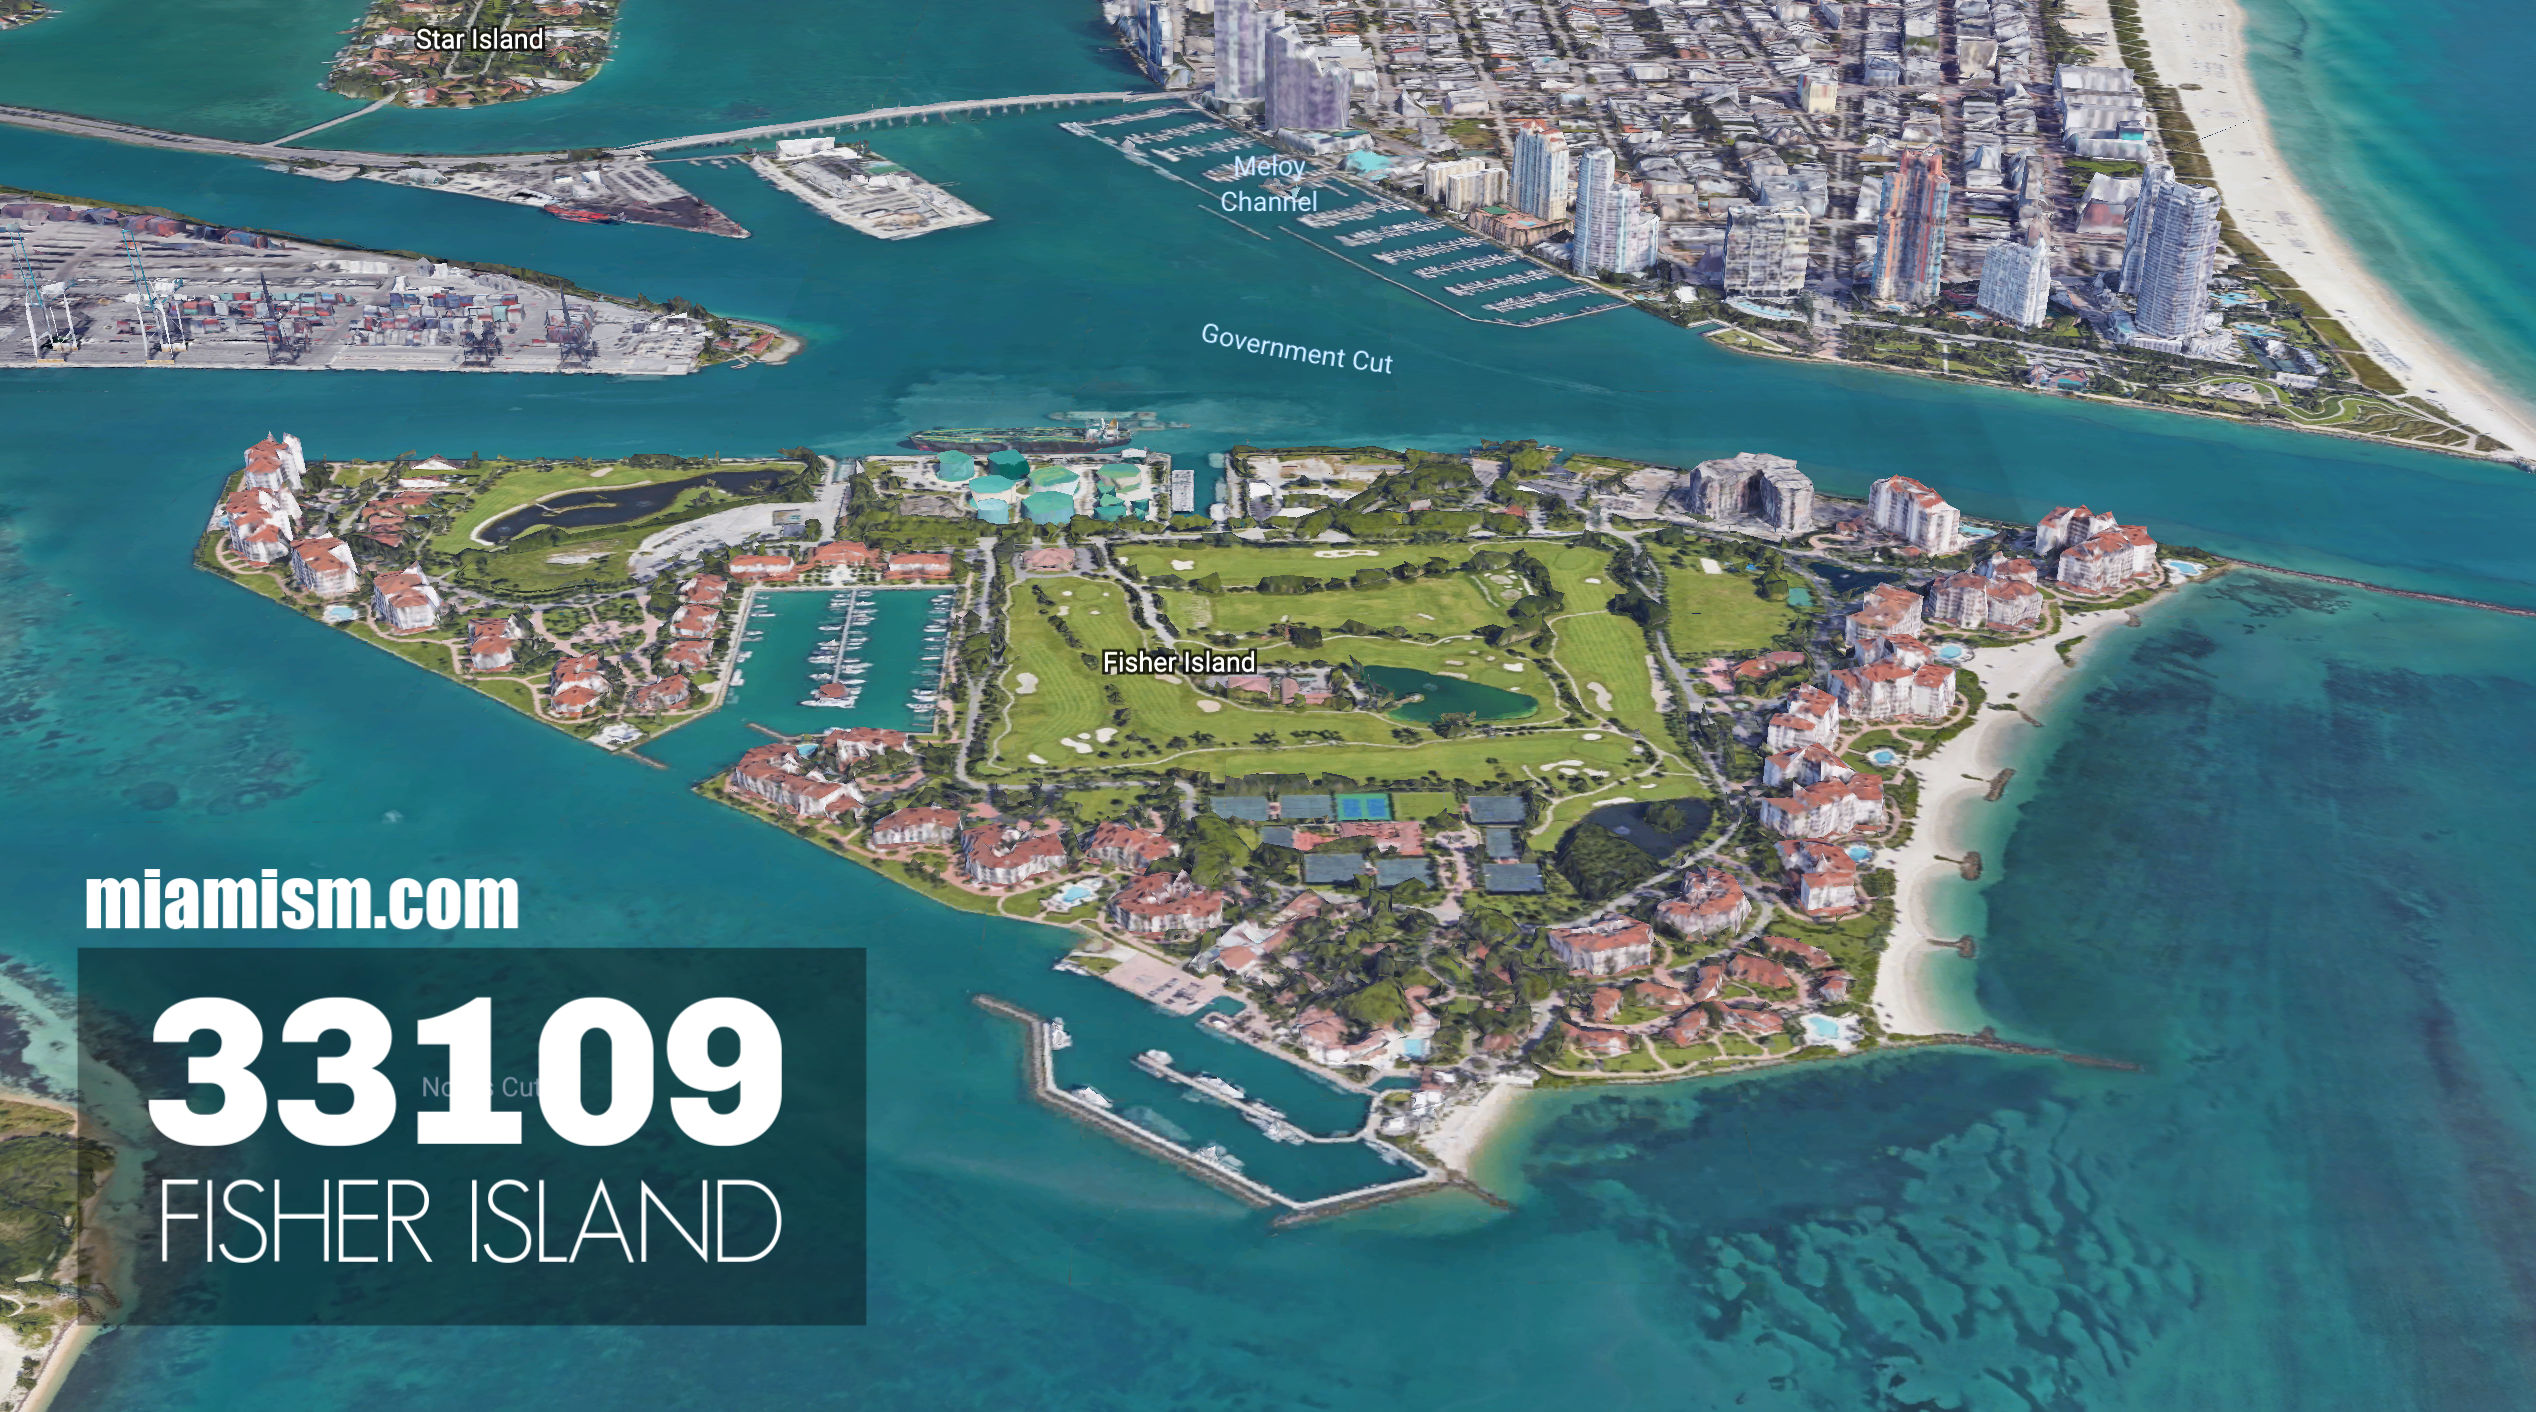 fisher-island-made-top-10-most-expensive-us-zip-codes-2018